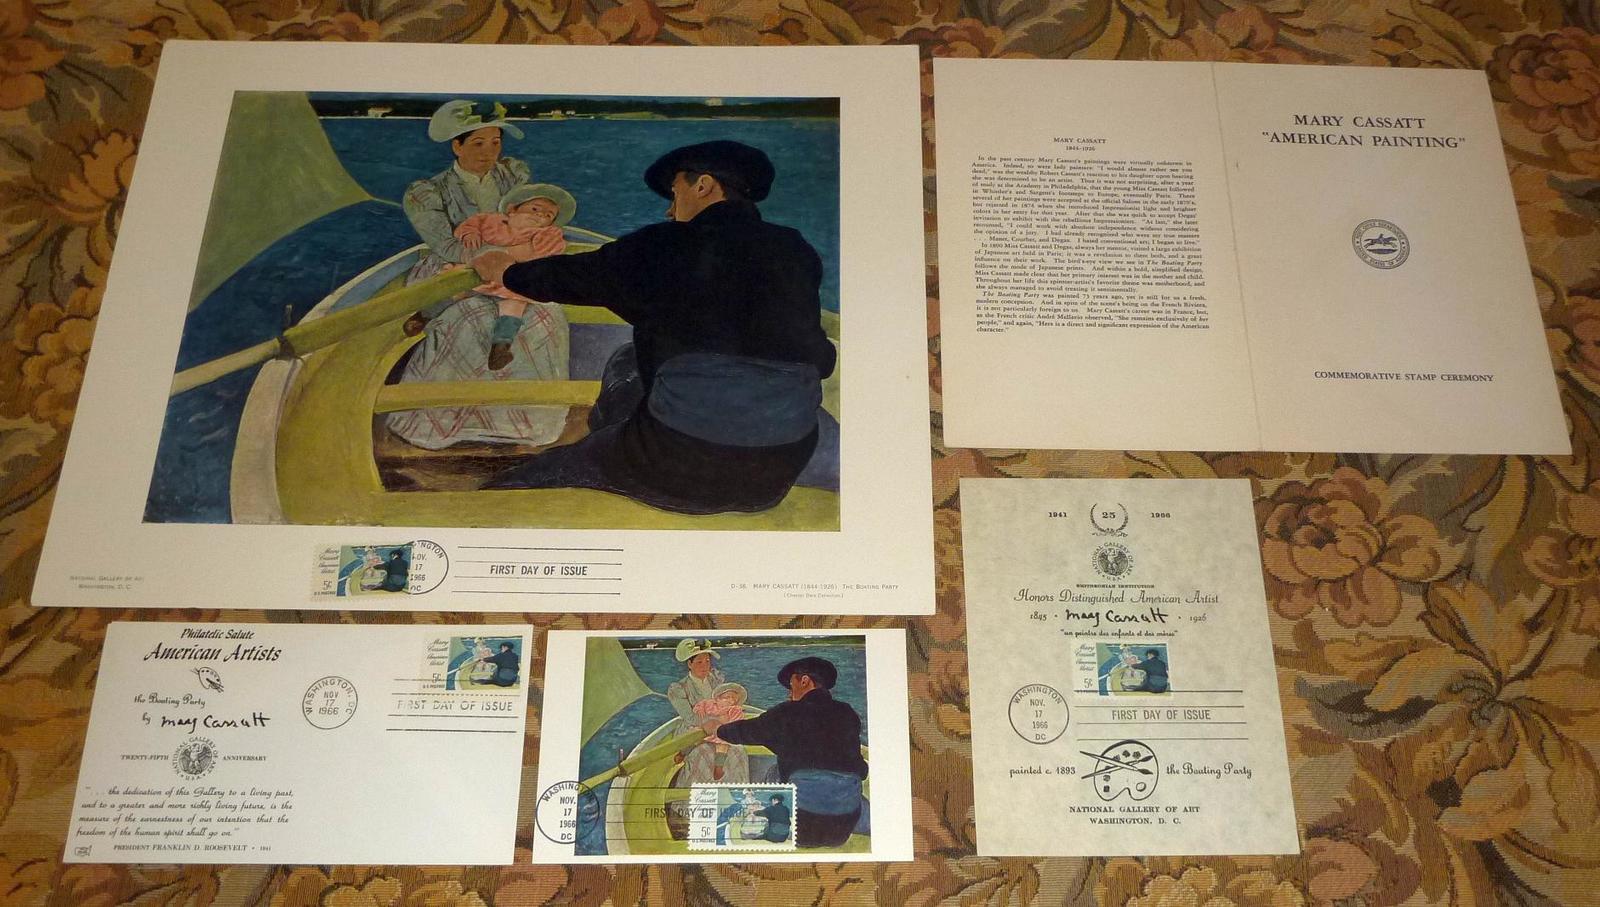 Primary image for Mary Cassatt "Boating Party" First Day Issue Stamps, Covers, Print, Program